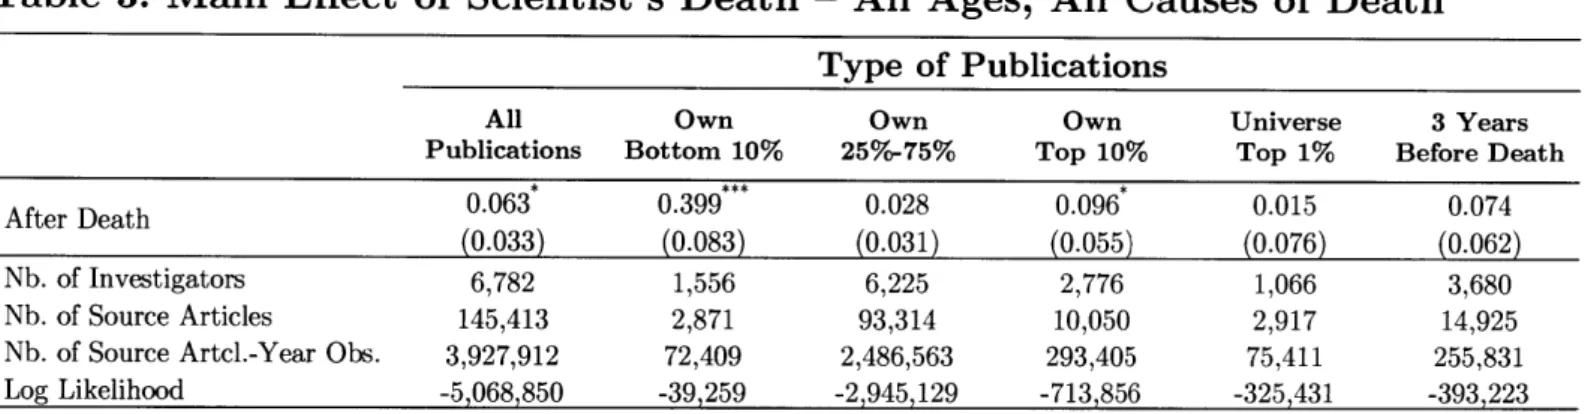 Table  3:  Main  Effect  of  Scientist's  Death  - All  Ages,  All  Causes  of  Death Type  of  Publications